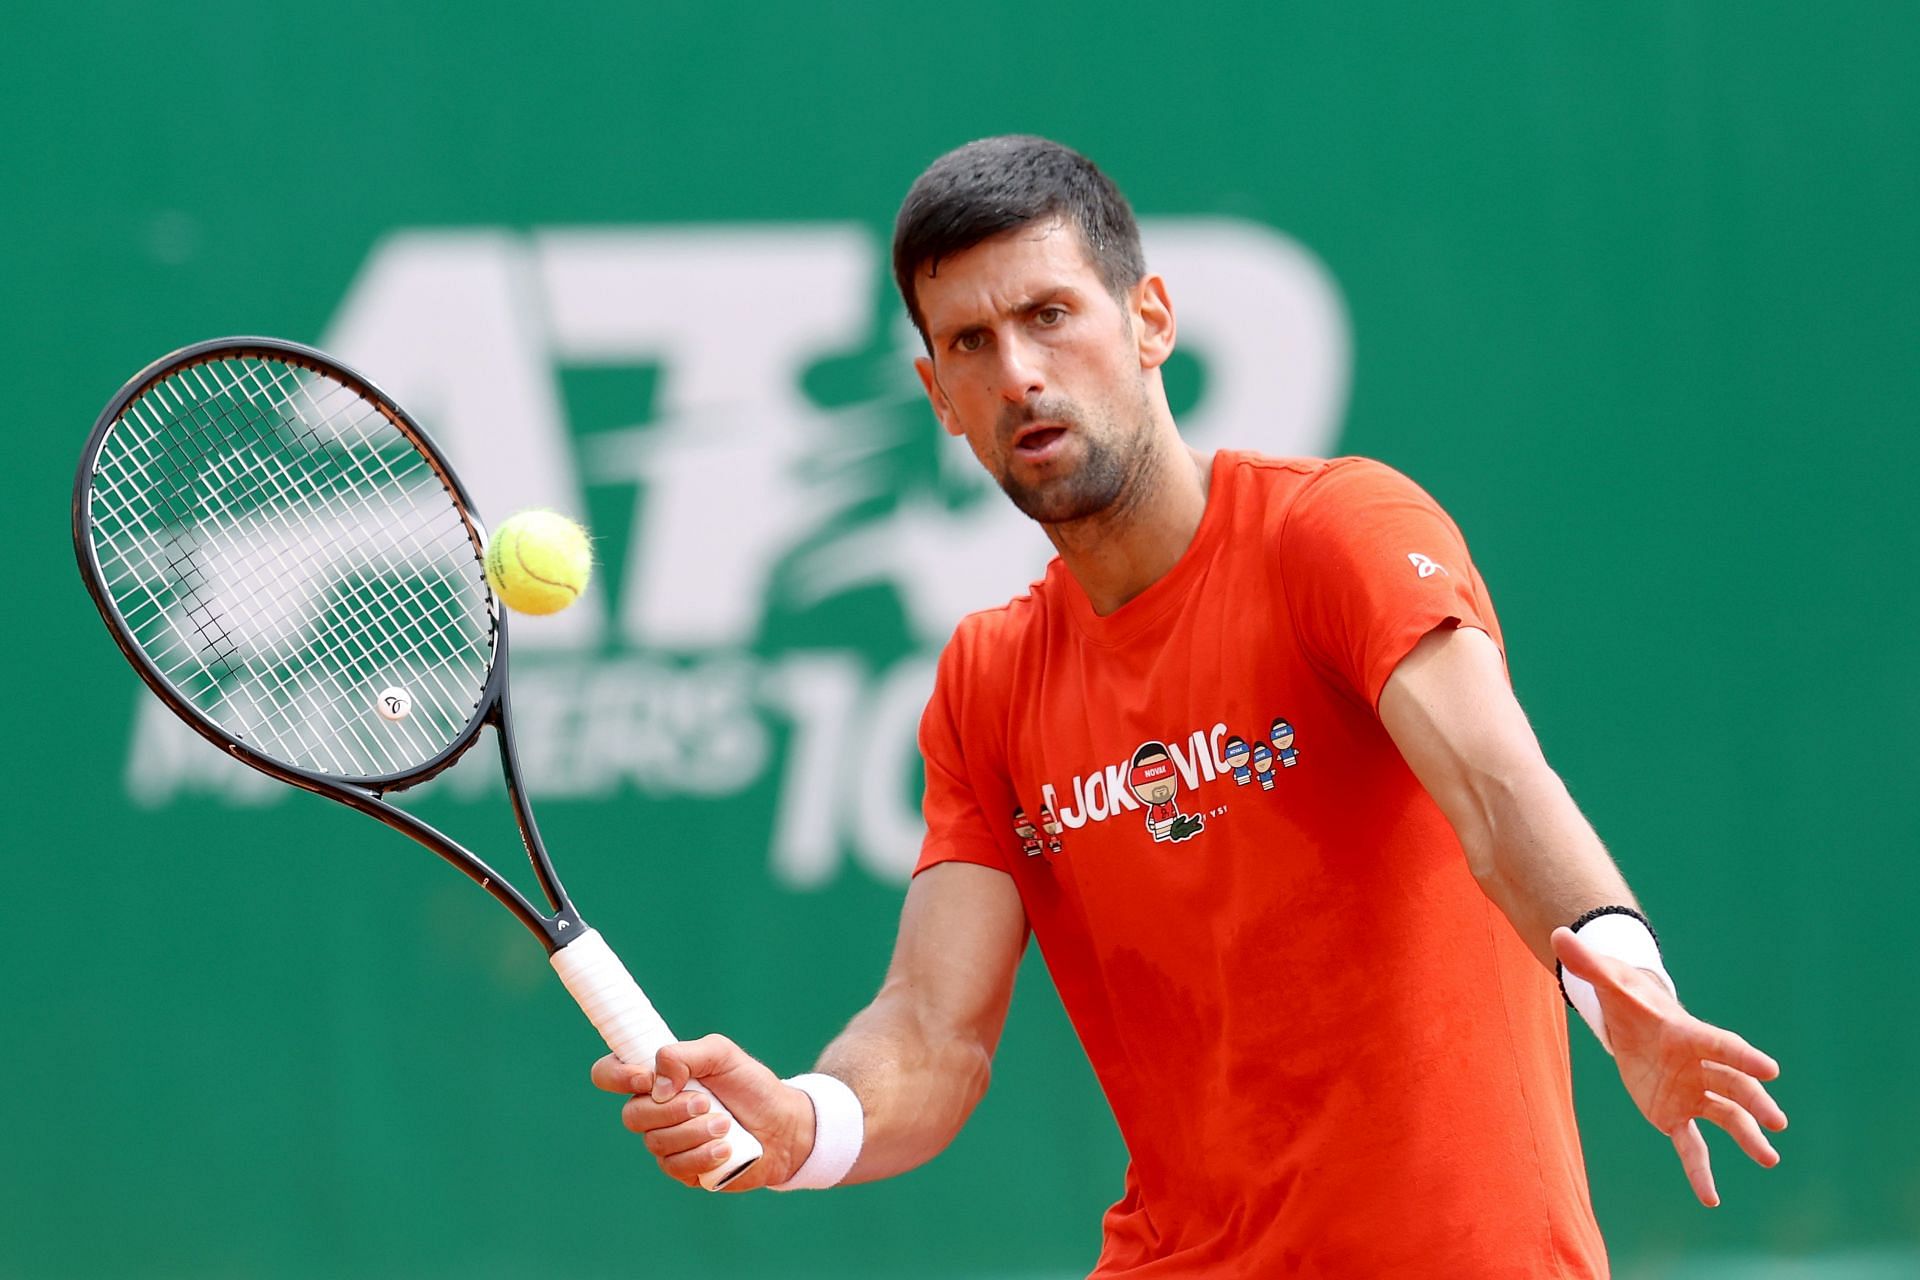 Novak Djokovic will be looking to win his third title at the Monte-Carlo Masters